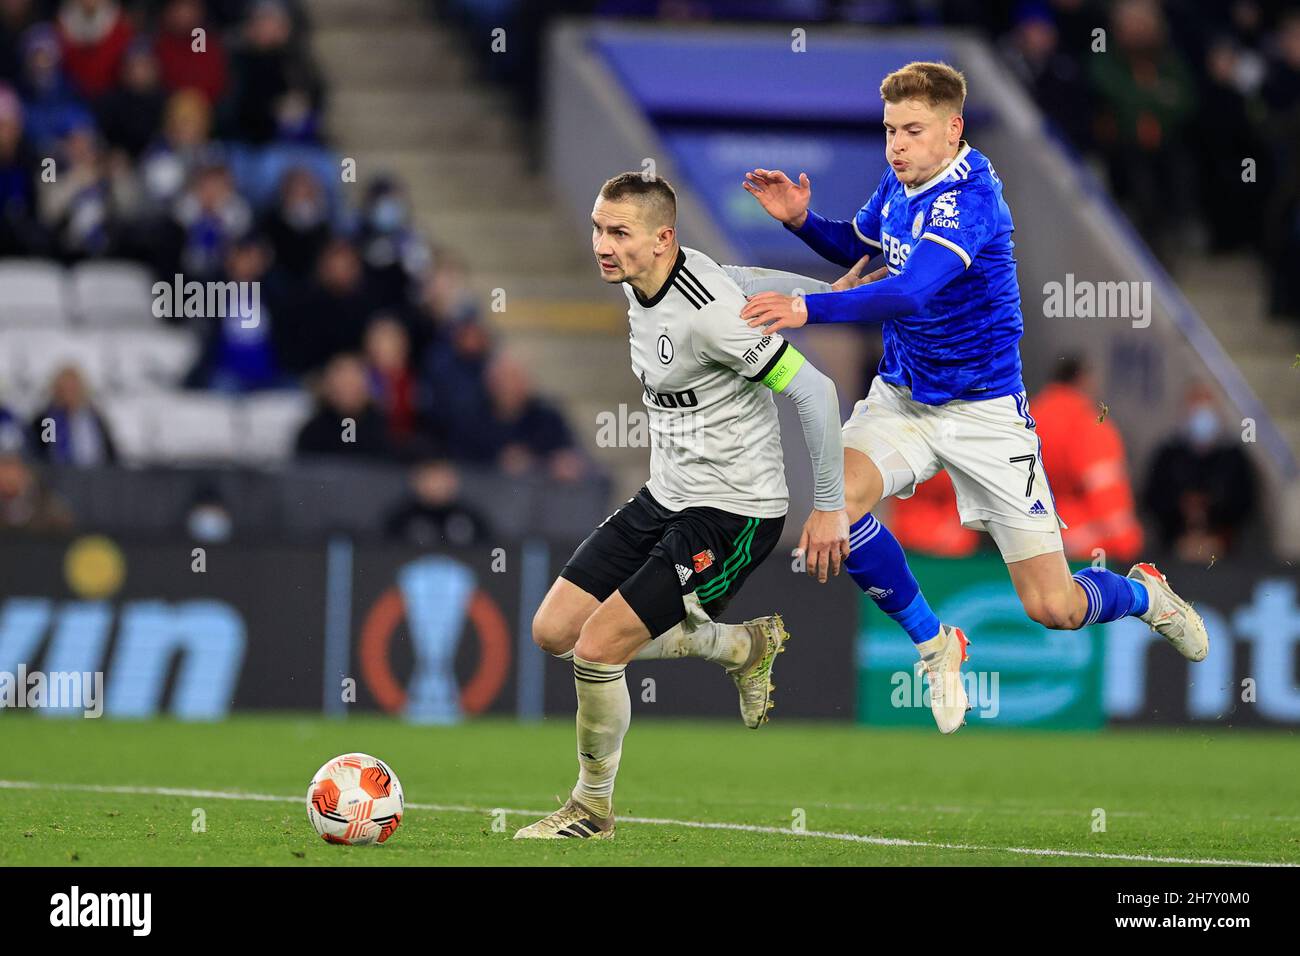 Harvey Barnes #7 of Leicester City cannot get past Artur Jedrzejczyk #55 of Legia Warsaw Stock Photo